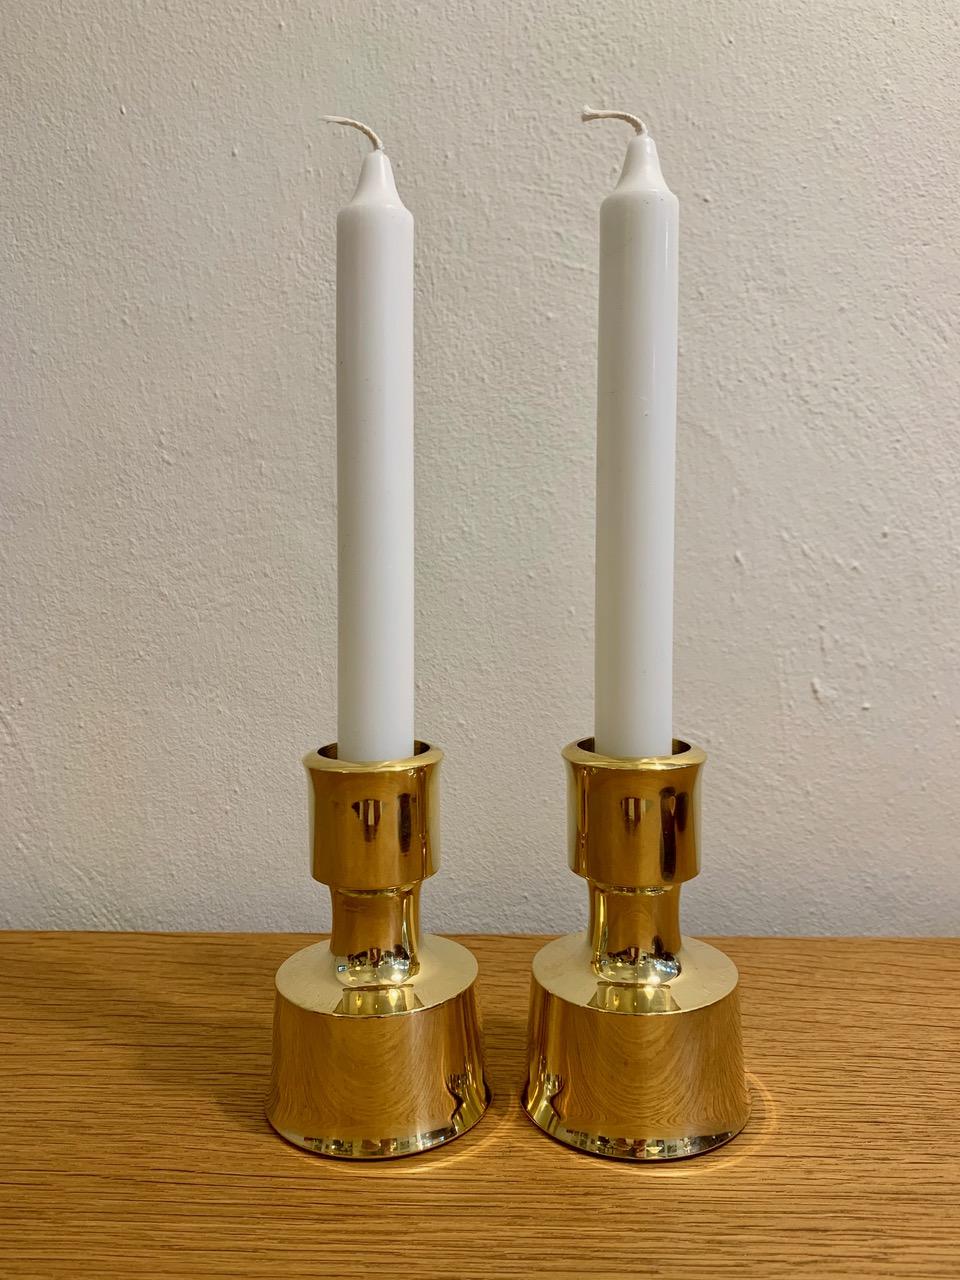 Beautiful set of timeless vintage solid brass candlesticks by Danish designer, sculptor Jens Harald Quistgaard (1919-2008) for Dansk Design, 1963. 
Very nice heavy quality. 
Candle holders come in very good, freshly polished condition. 

Marked on